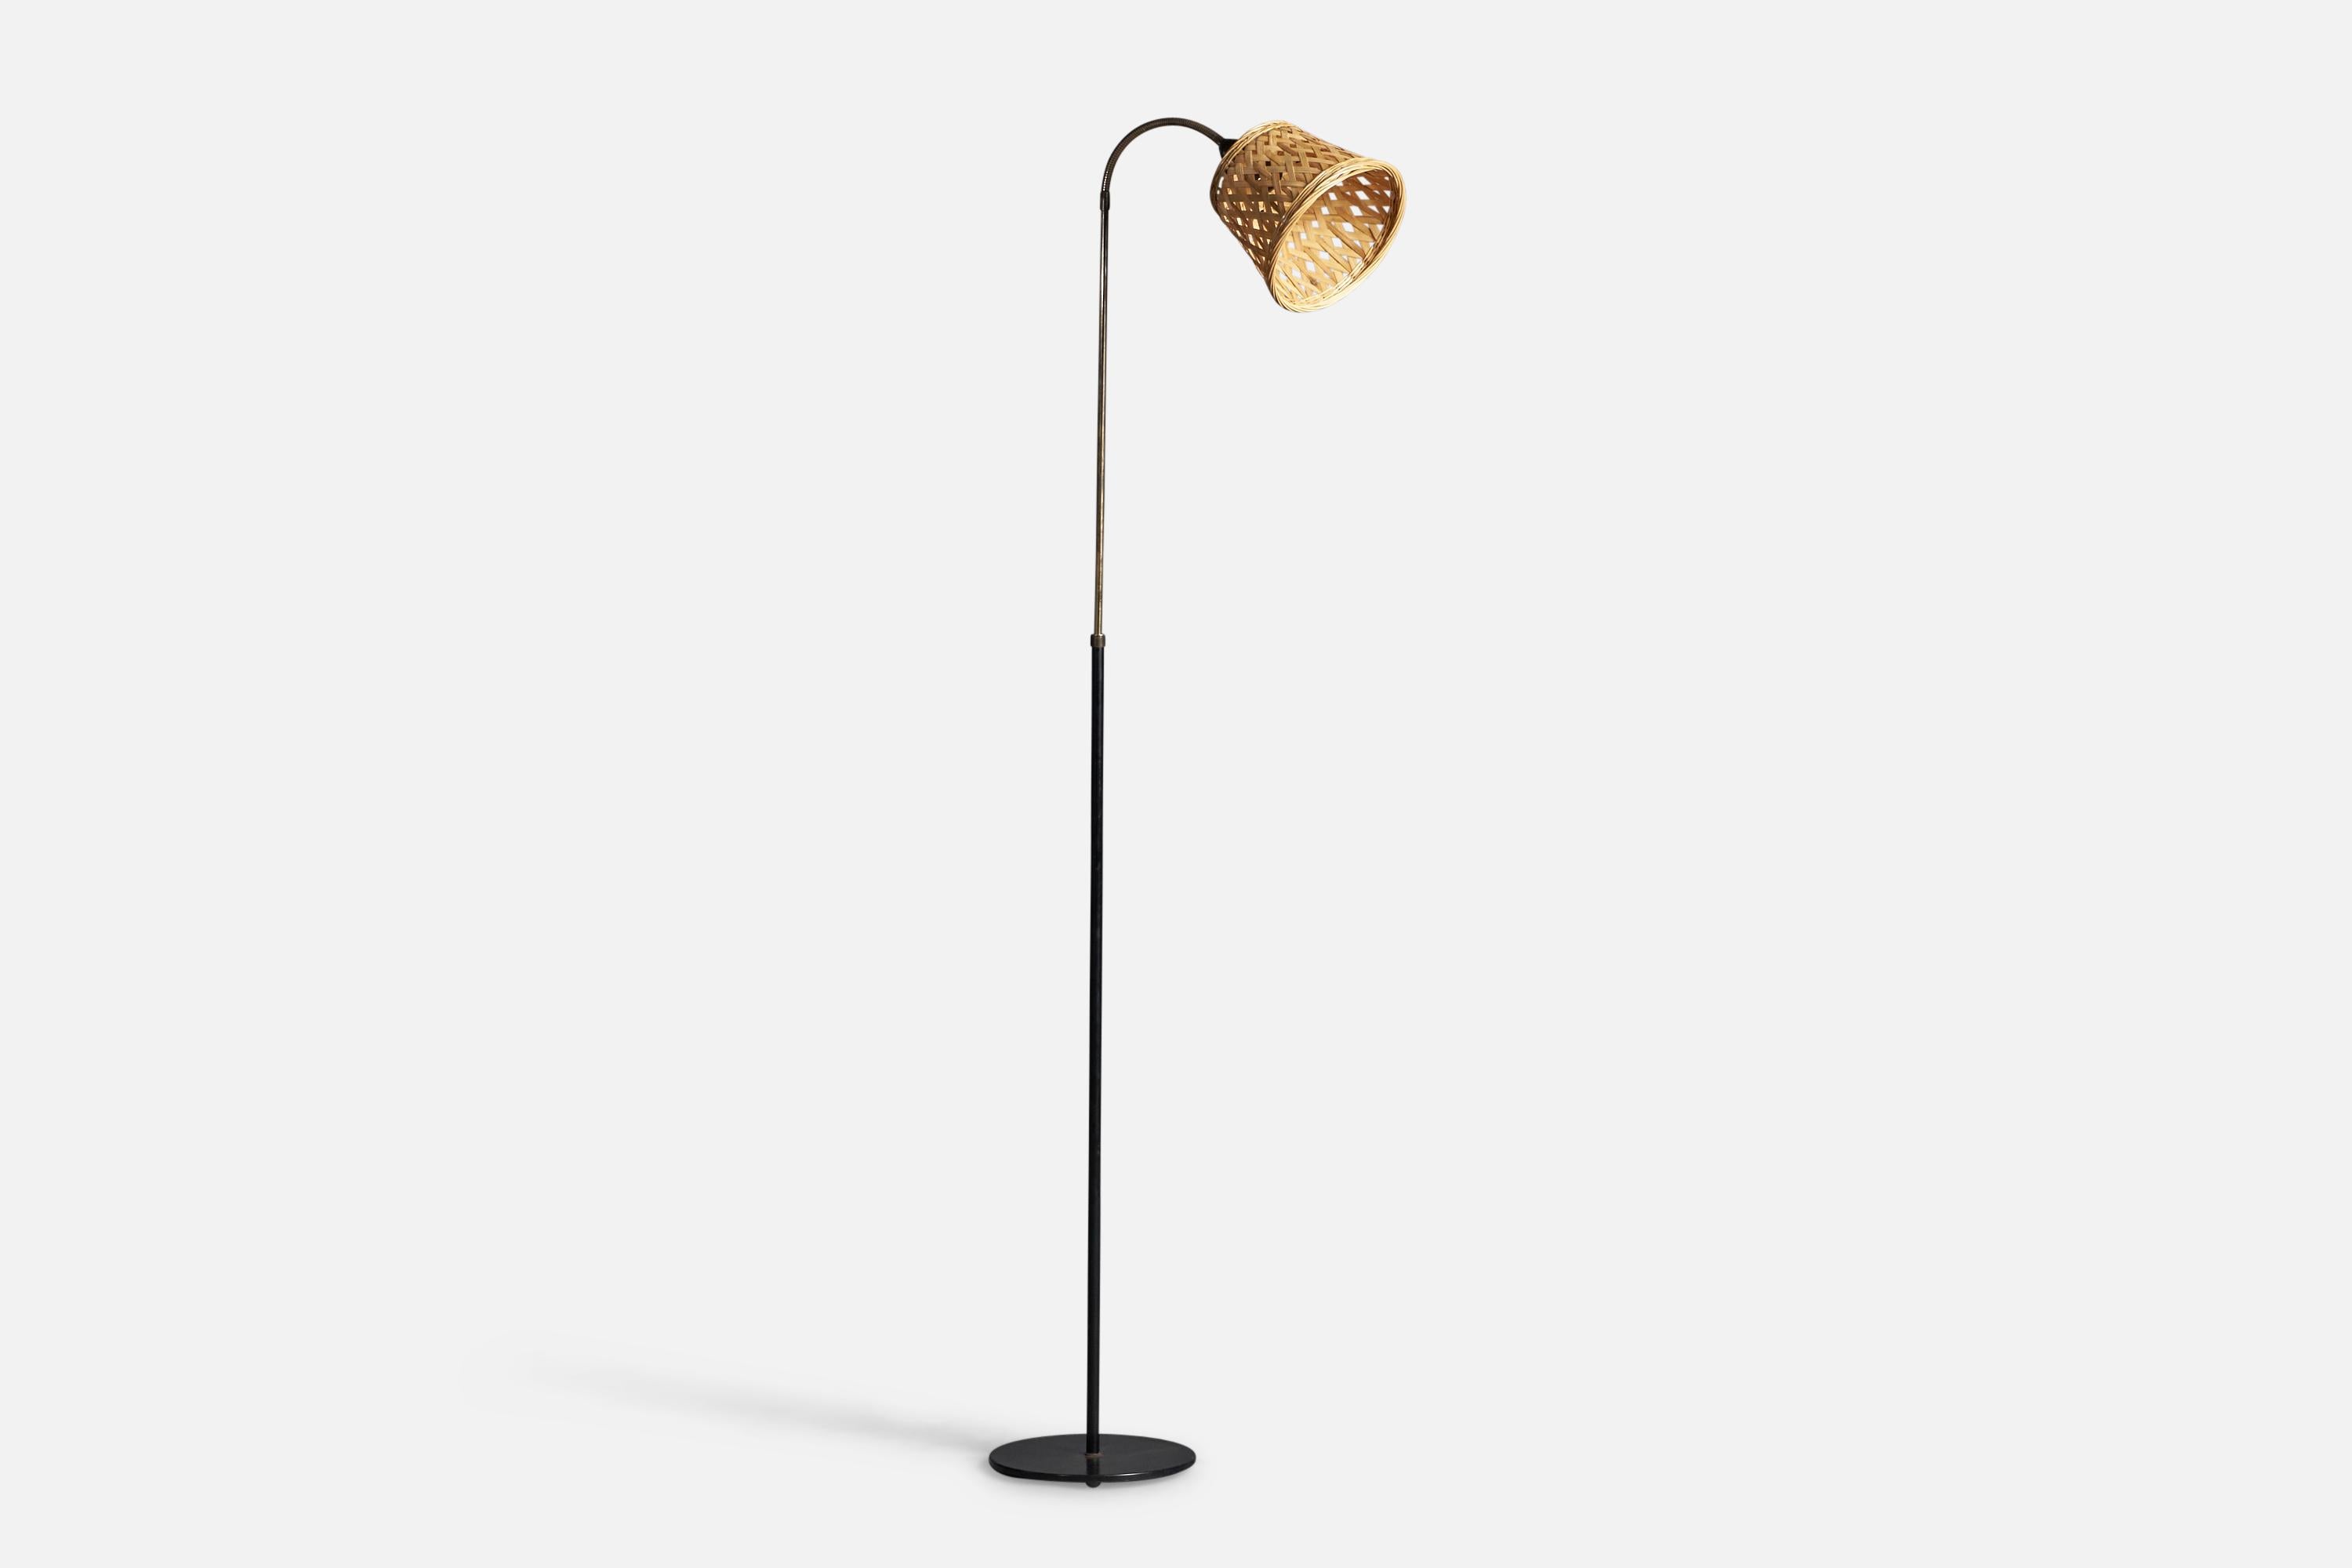 An adjustable brass, rattan and black-lacquered metal floor lamp, designed and produced in Denmark, c. 1950s.

Overall Dimensions: 60.25